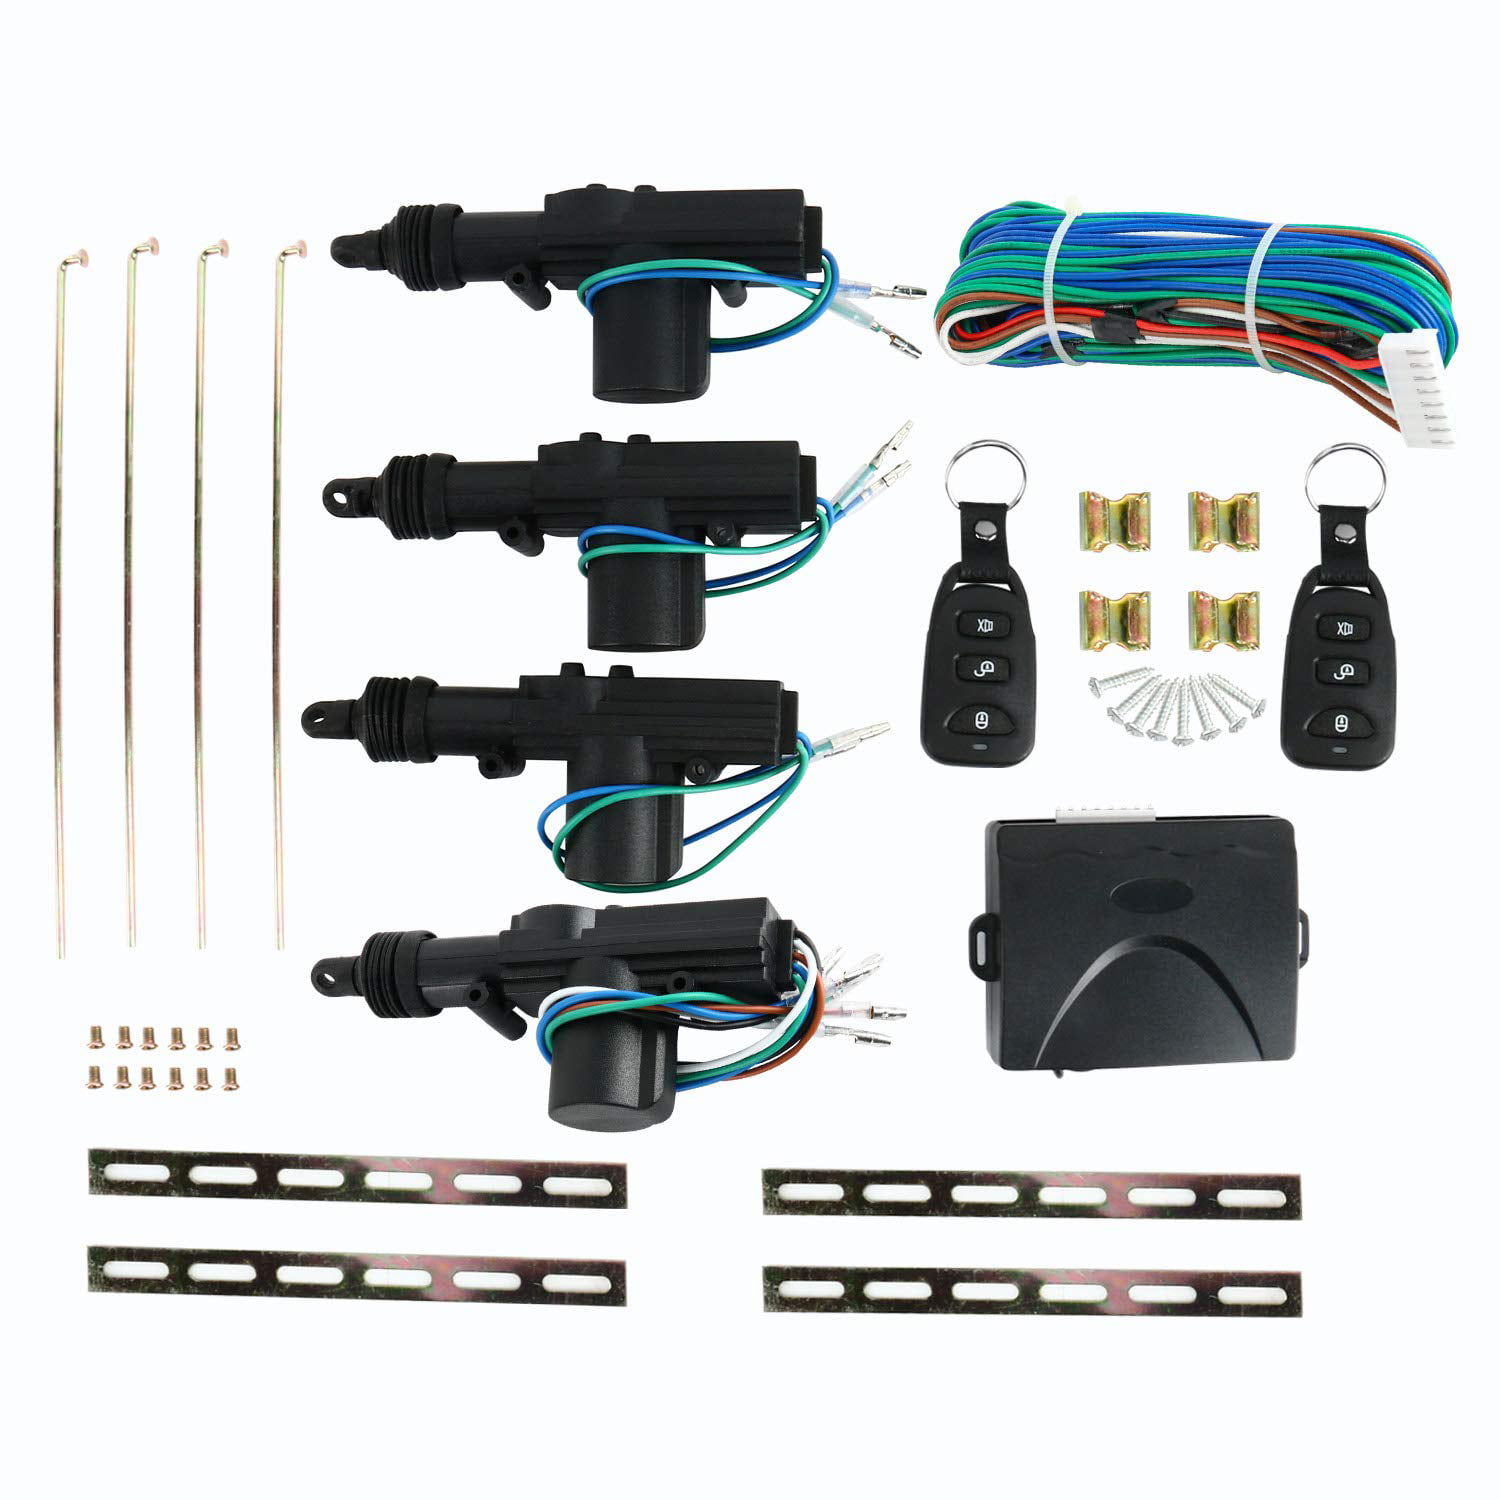 HYDDNice Universal Car Locking System Car Lock Convertion Kit with Remotes Keyless Entry Security 